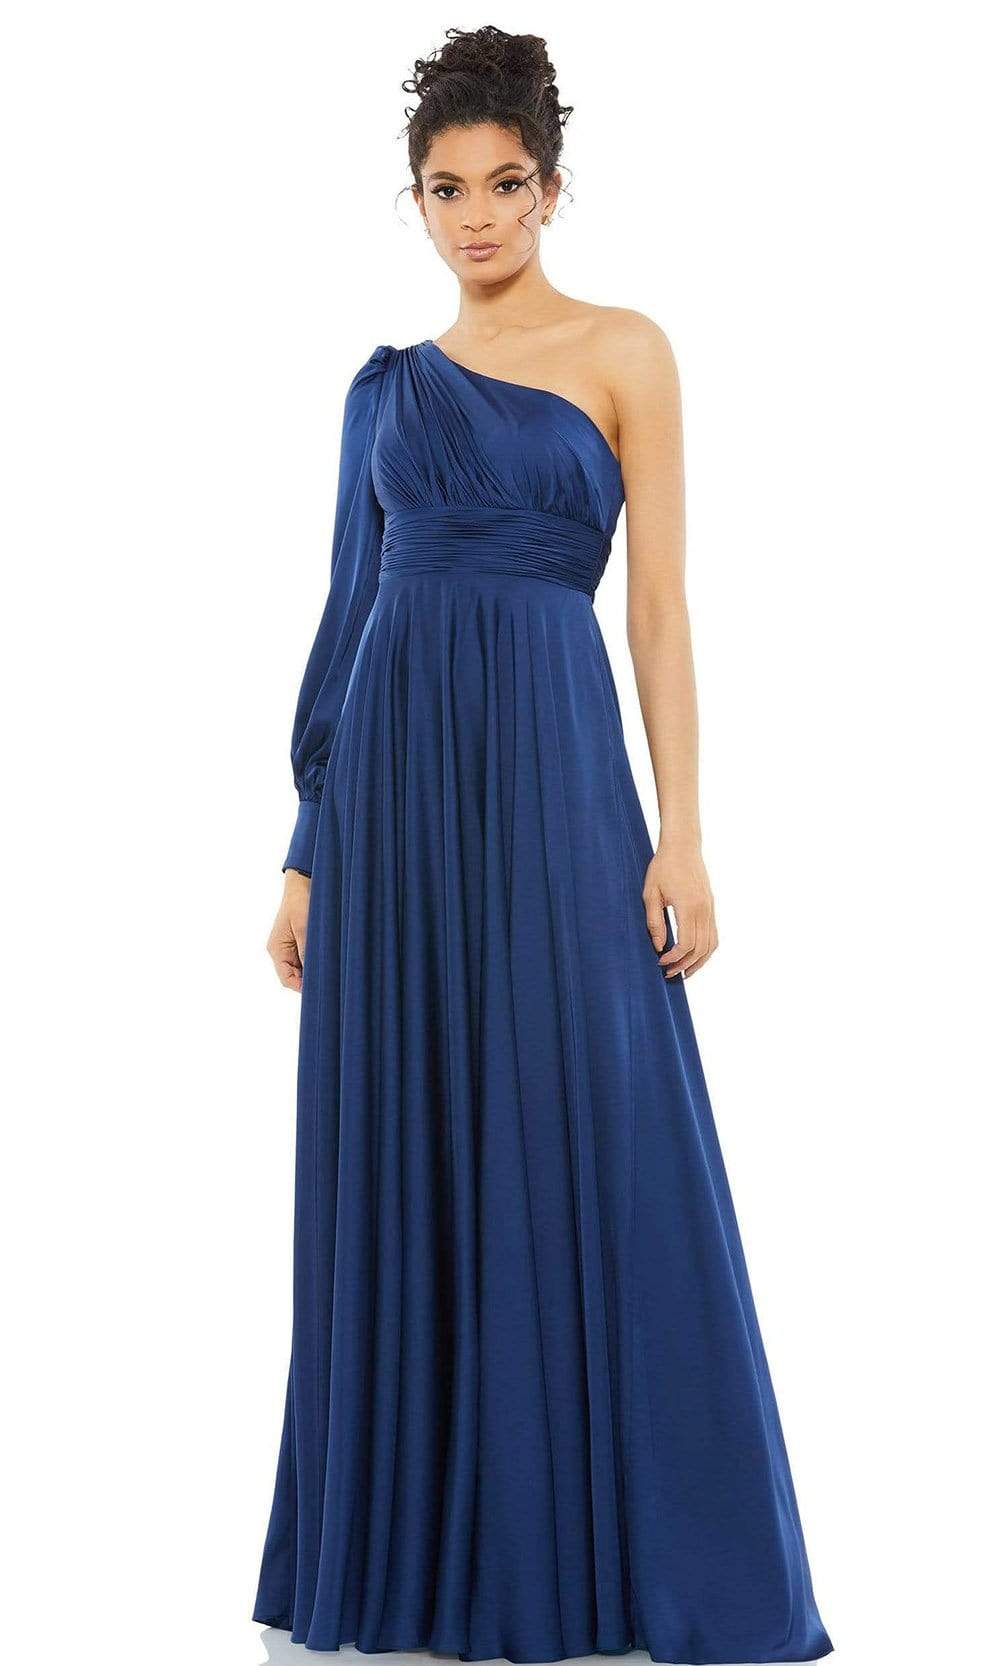 Ieena Duggal - 67866I One Shoulder Satin A-Line Gown Special Occasion Dress 0 / Midnight